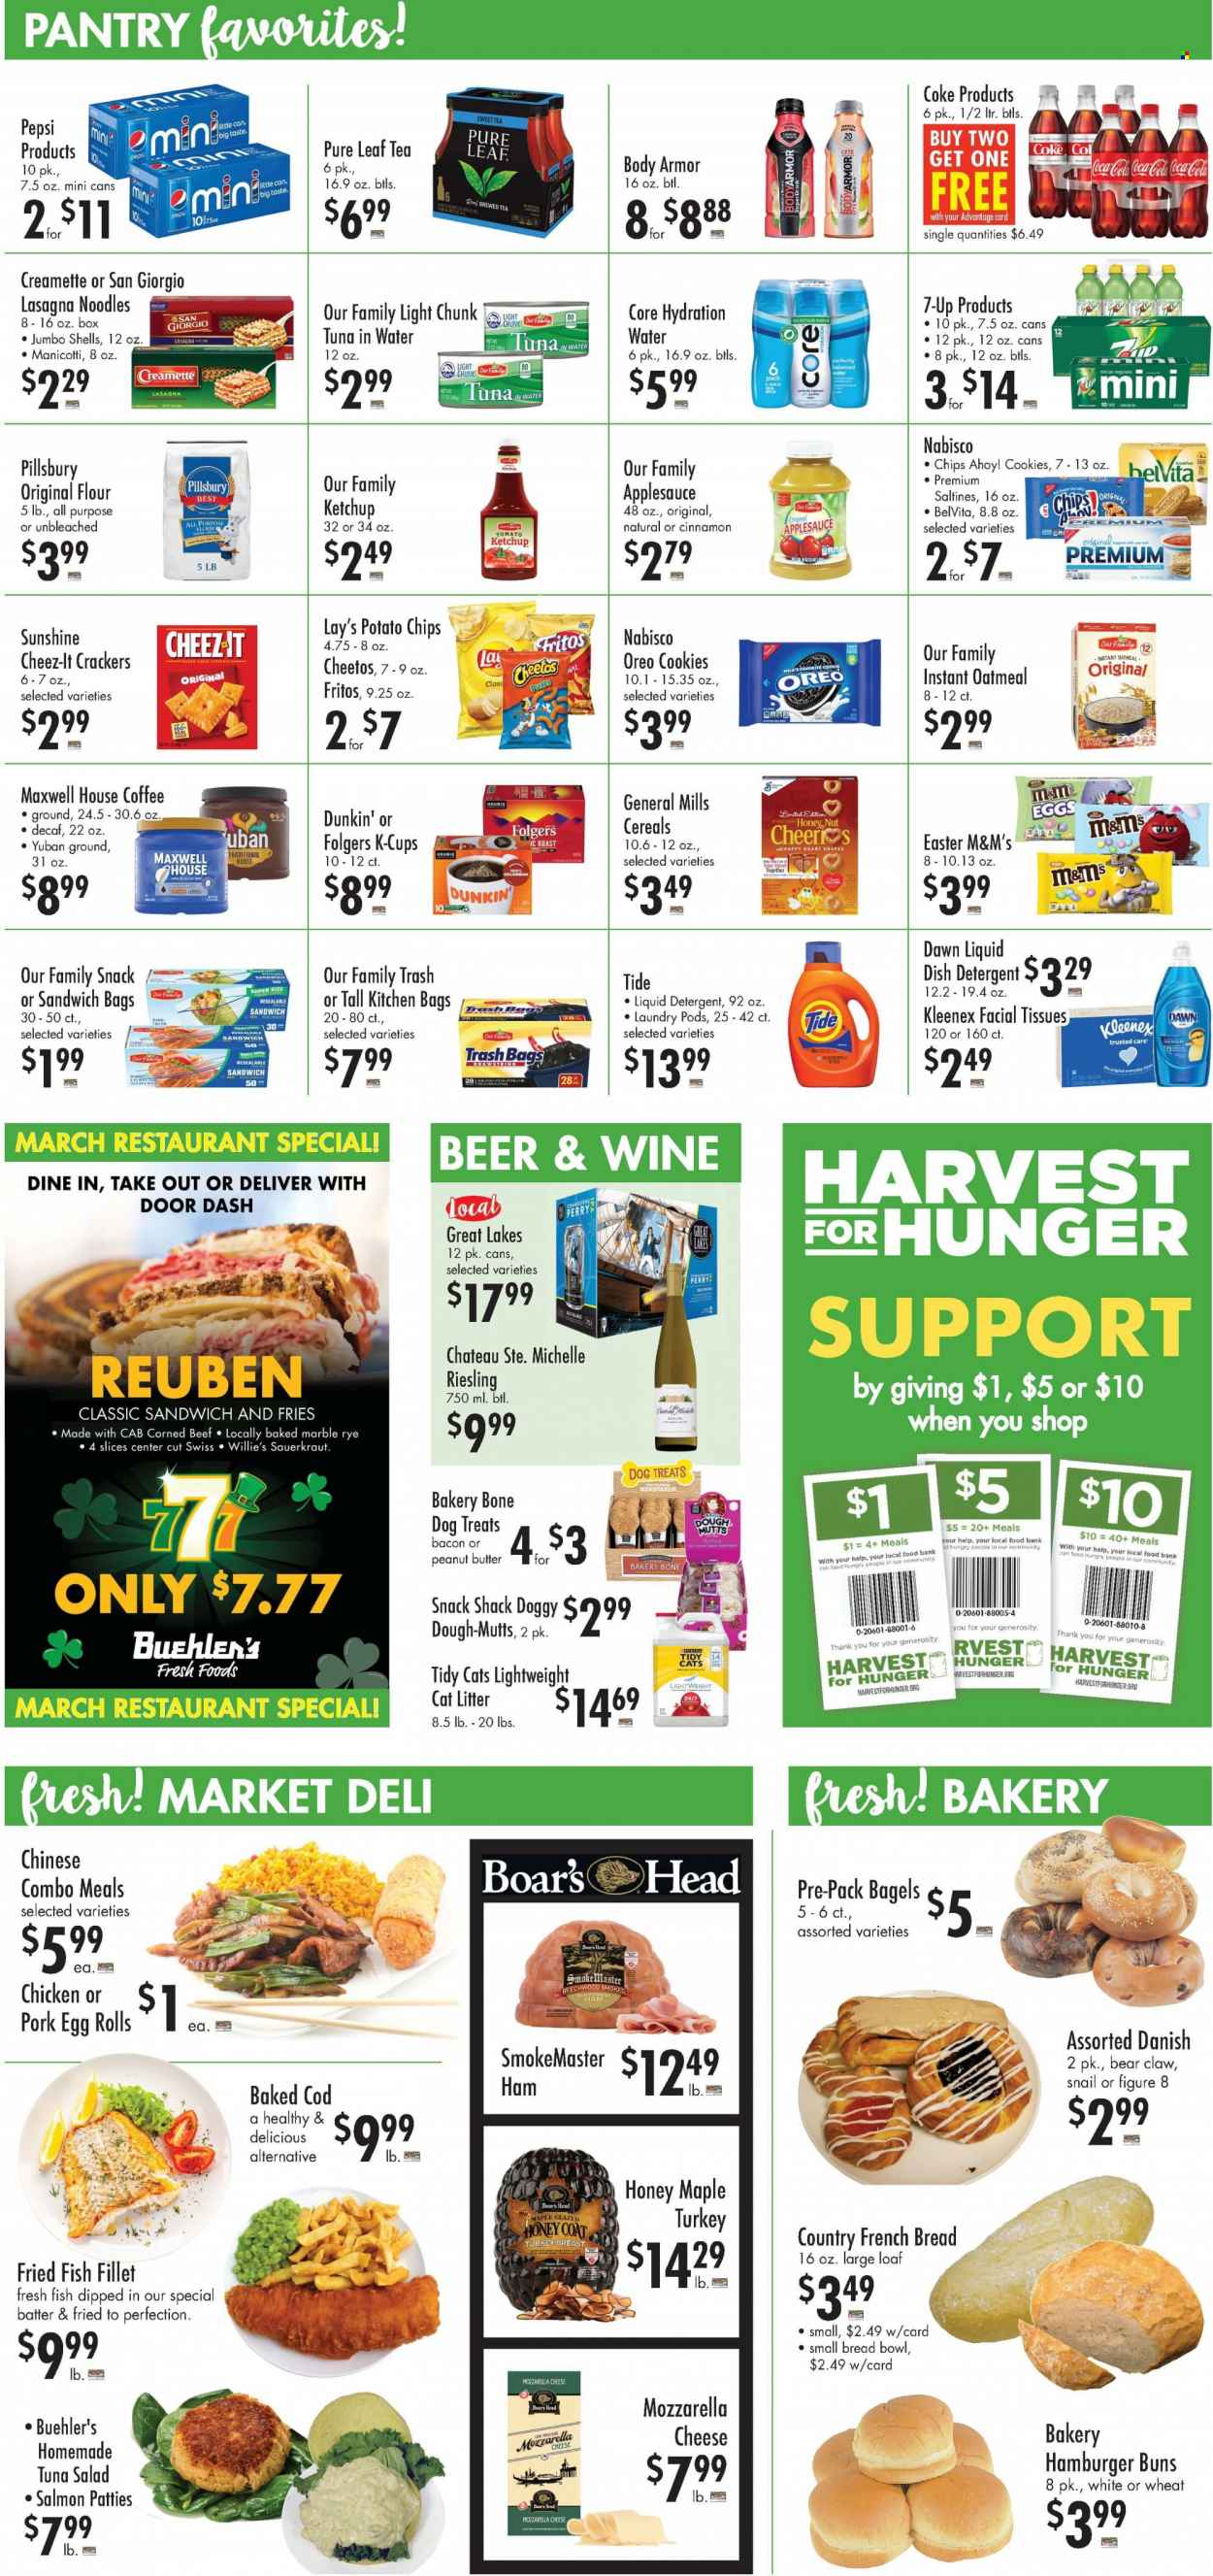 thumbnail - Buehler's Flyer - 03/22/2023 - 03/28/2023 - Sales products - bagels, bread, cake, buns, burger buns, french bread, puffs, salad, cod, fish fillets, tuna, fish, fried fish, egg rolls, Pillsbury, noodles, lasagna meal, roast, bacon, ham, tuna salad, corned beef, mozzarella, Oreo, Sunshine, potato fries, cookies, snack, M&M's, crackers, Chips Ahoy!, Fritos, potato chips, Cheetos, chips, Lay’s, Cheez-It, saltines, flour, oatmeal, sauerkraut, tuna in water, cereals, Cheerios, belVita, Creamette, cinnamon, ketchup, apple sauce, Pepsi, Body Armor, 7UP, Coke, water, Maxwell House, tea, Pure Leaf, coffee, Folgers, coffee capsules, K-Cups, Keurig, Riesling, white wine, wine, beer, turkey breast, chicken, beef meat, Kleenex, tissues, detergent, Tide, liquid detergent, dishwasher cleaner, facial tissues, trash bags, bowl, cat litter, Purina, tote. Page 2.